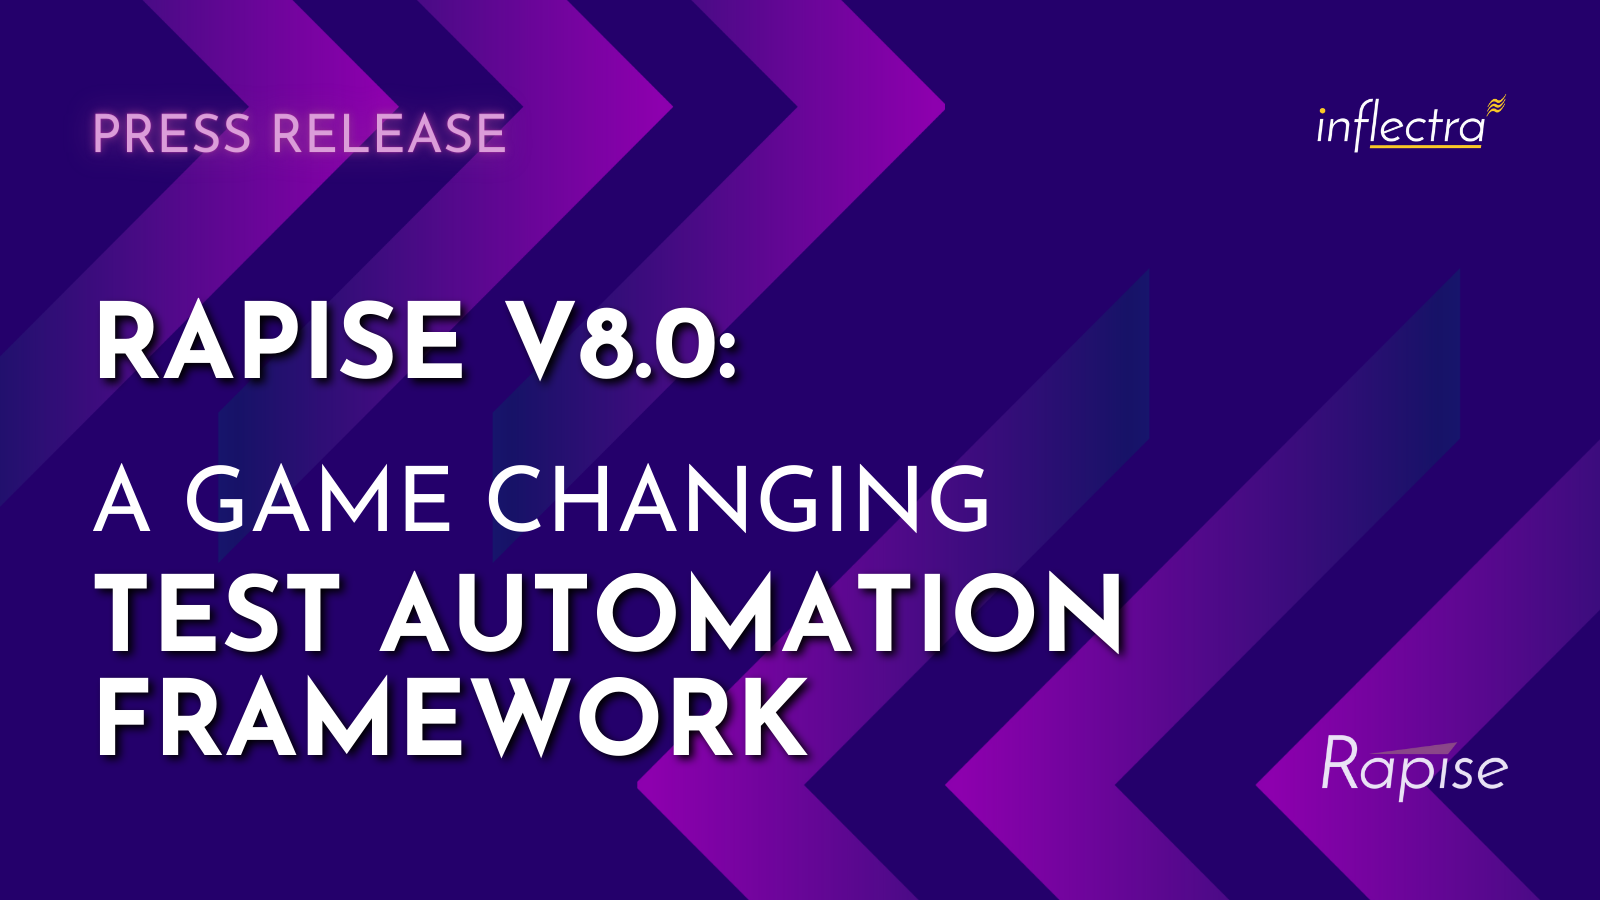 press-release-rapise-version-8-a-game-changing-test-automation-framework-inflectra-image